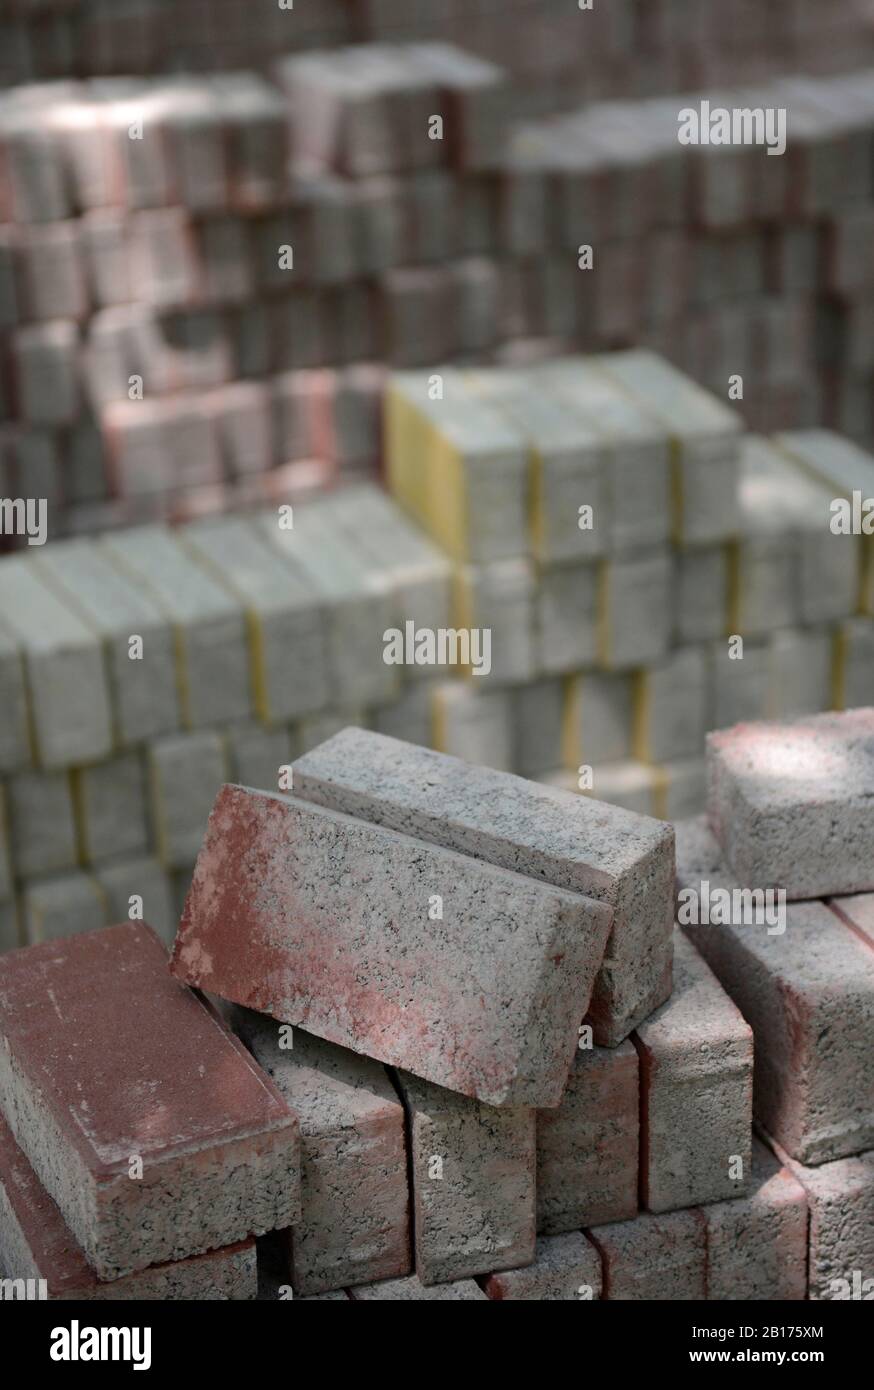 Stacks of paving bricks ready for laying on a path in Wangjing district, Beijing, China Stock Photo